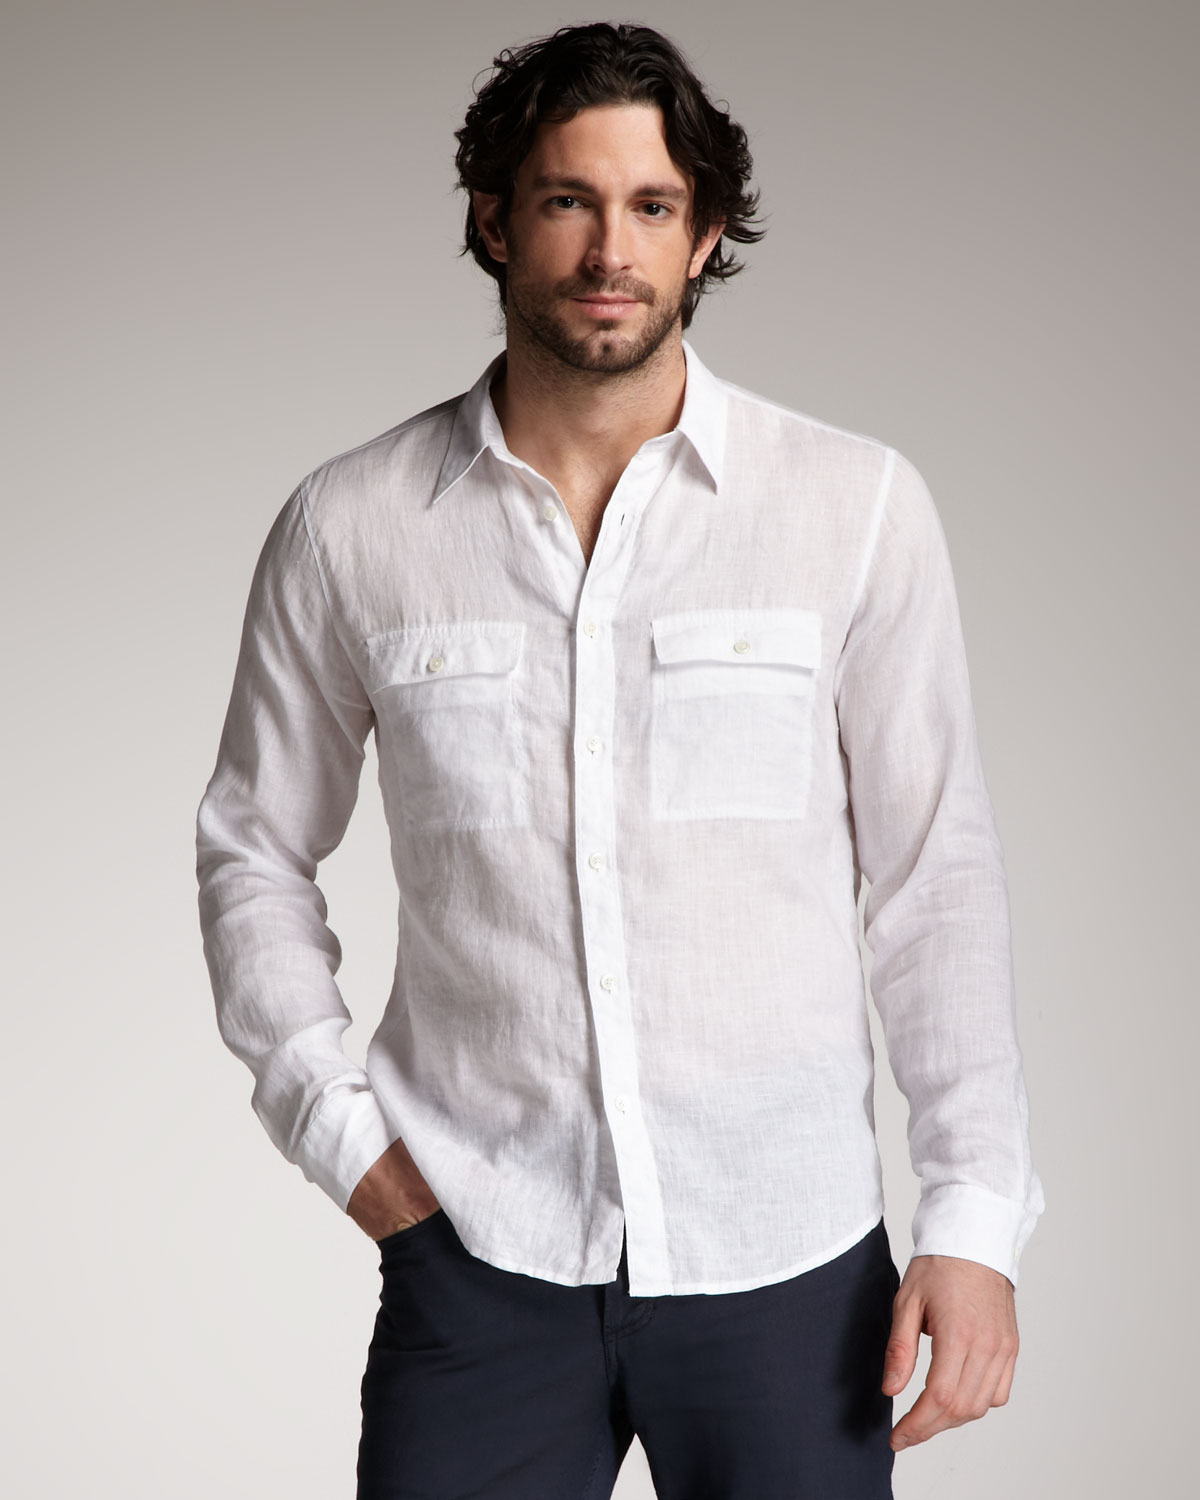 Theory Two-Pocket Linen Shirt in White for Men - Lyst